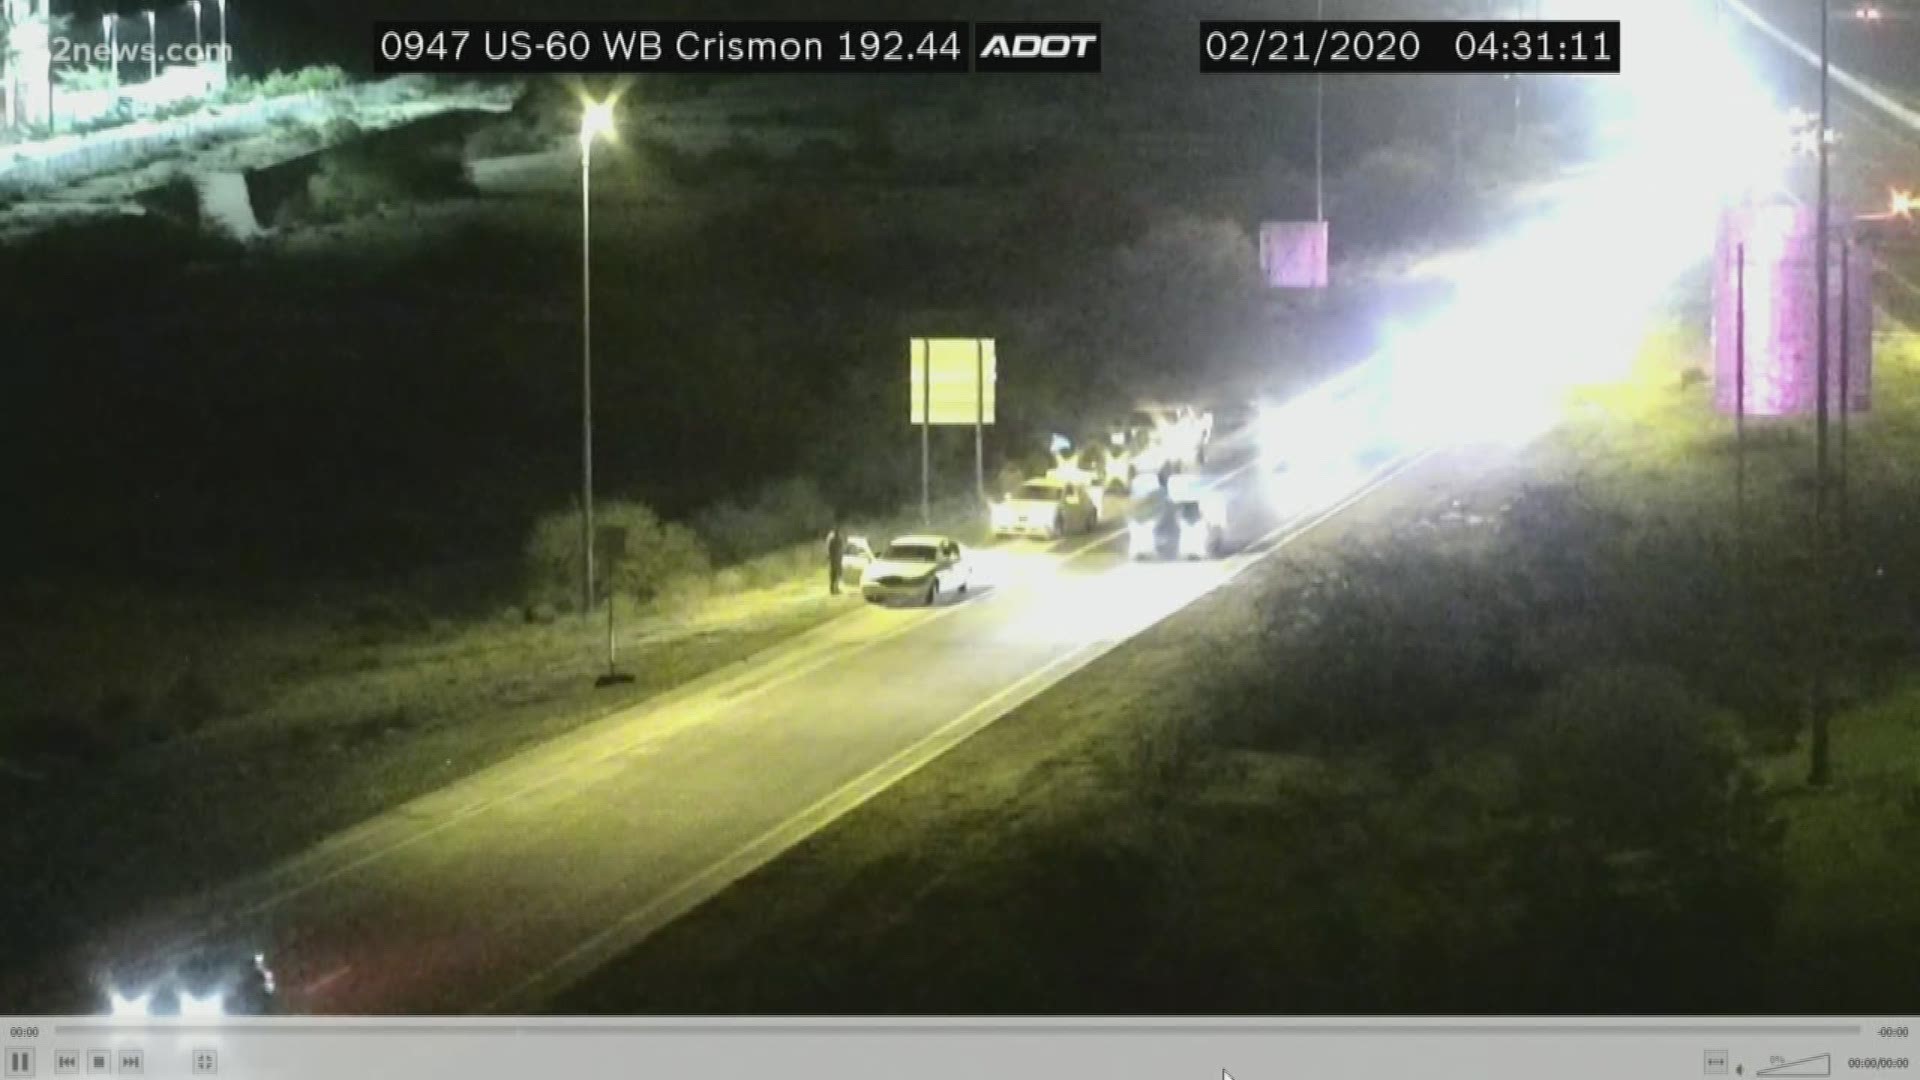 U.S. 60 westbound near Crismon Road was closed overnight due to a deadly crash.